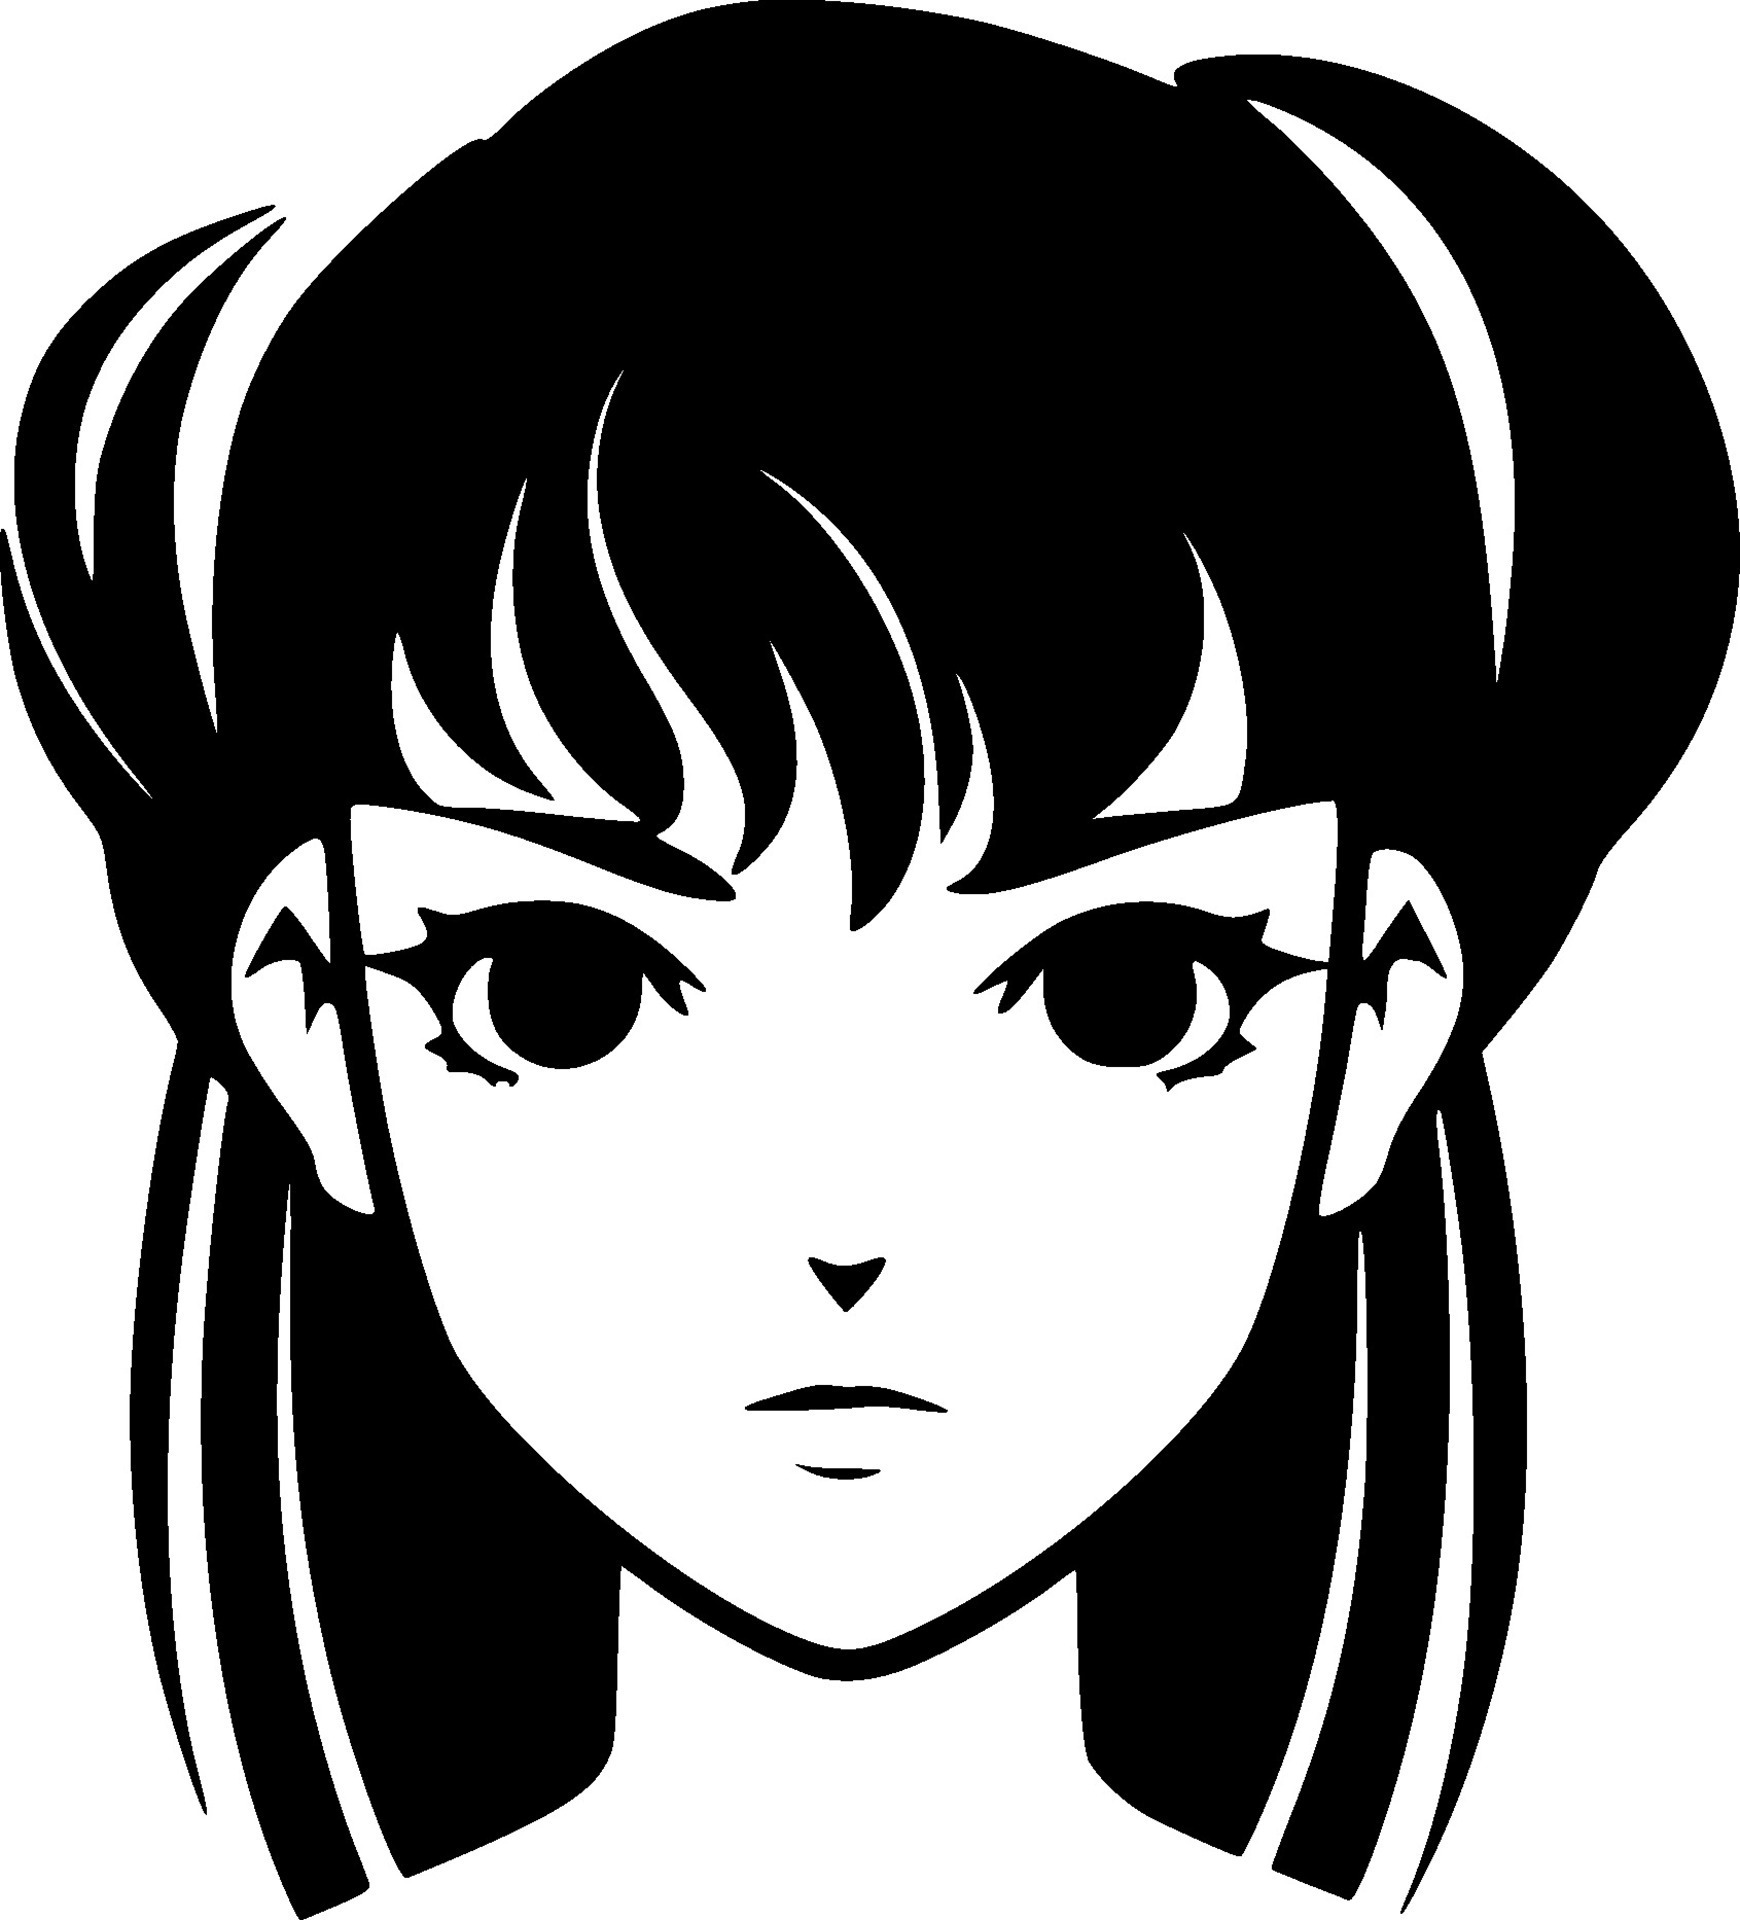 Anime - Black and White Isolated Icon - Vector illustration